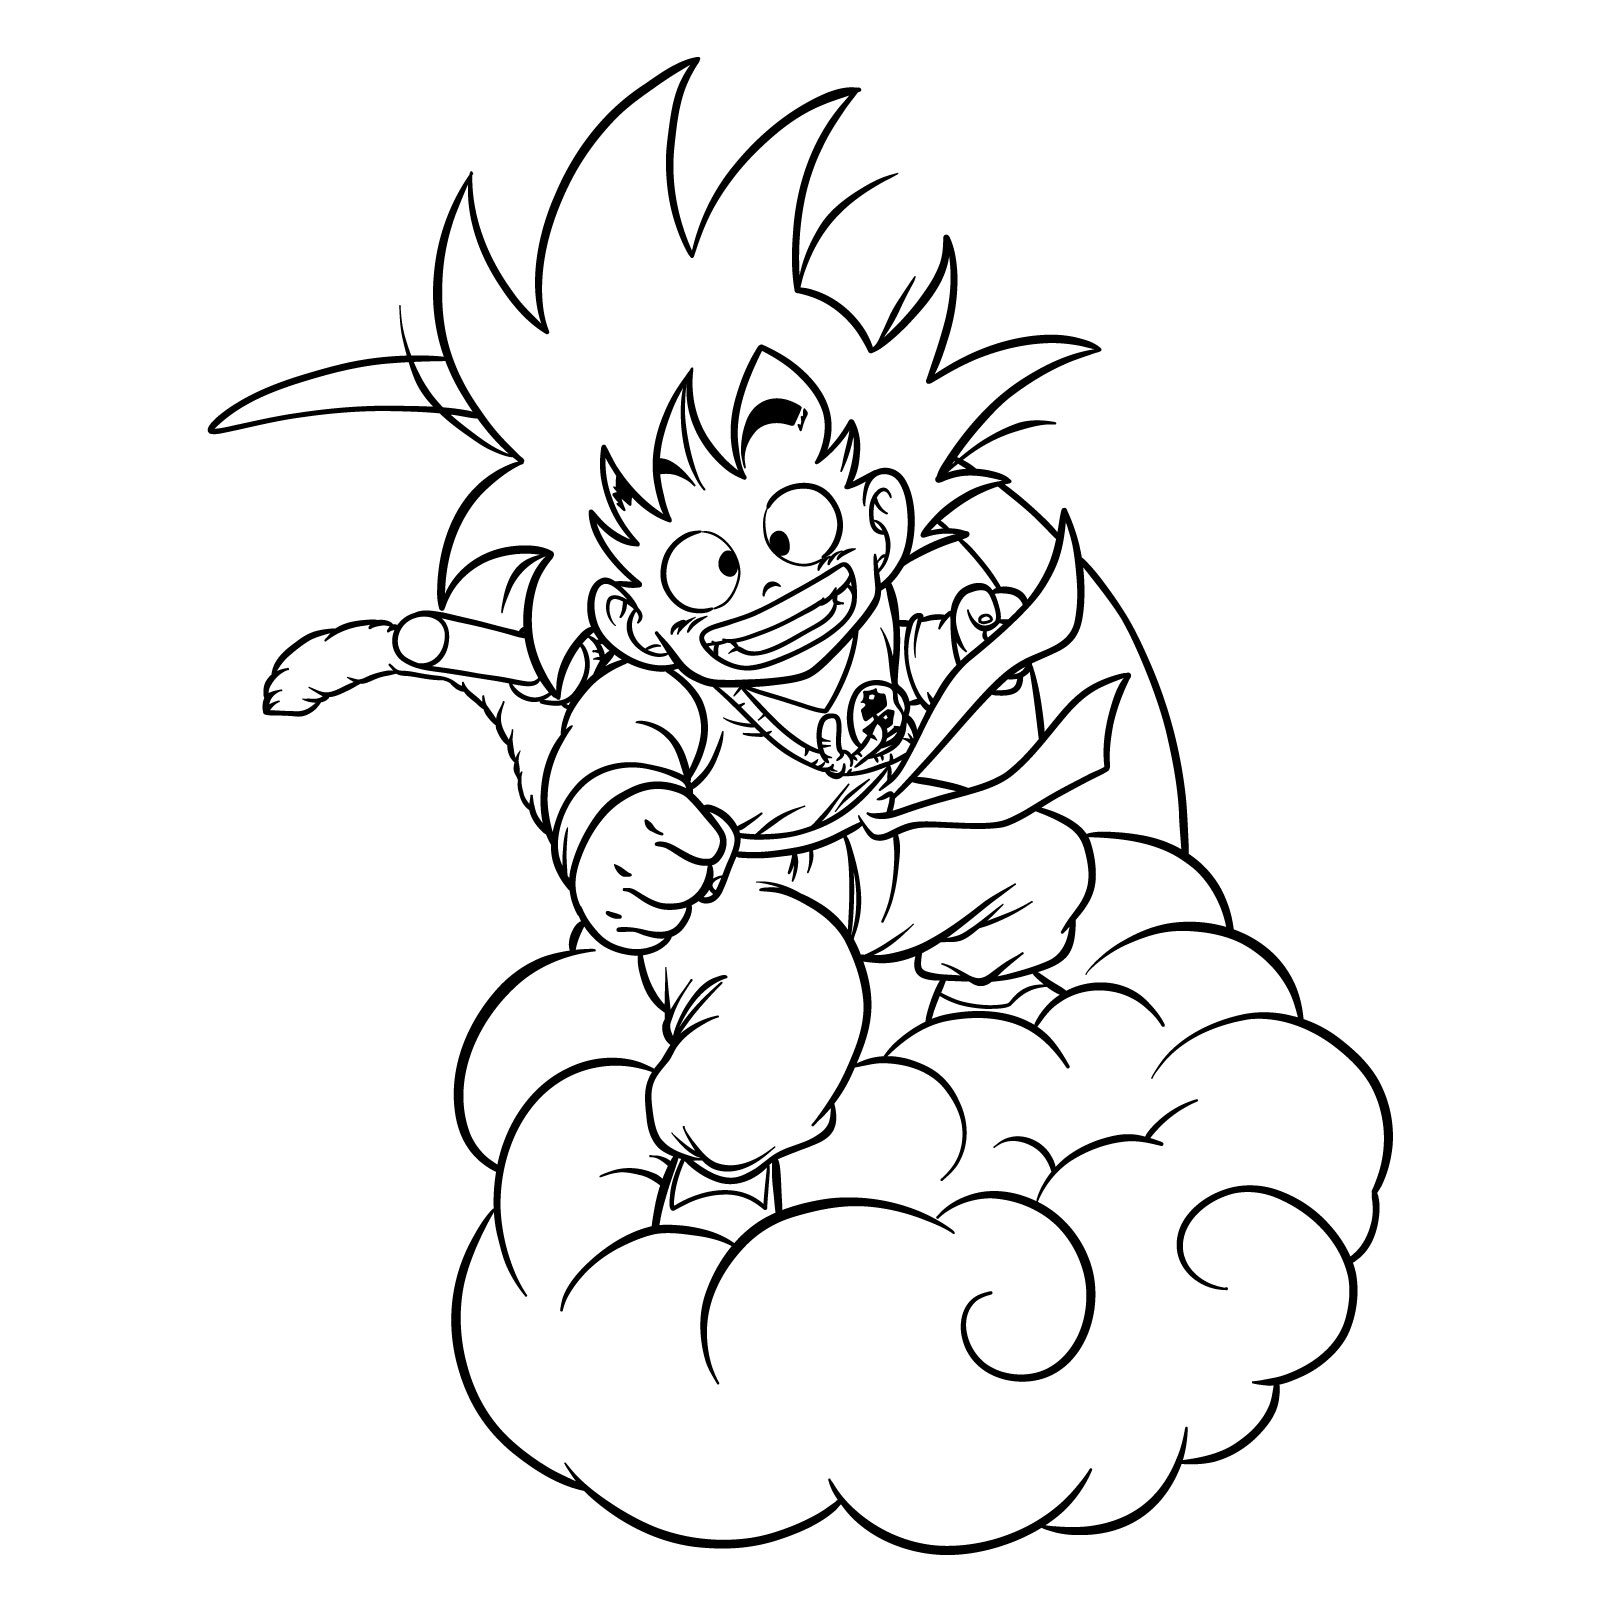 How to draw Kid Goku riding on the Flying Nimbus - final step